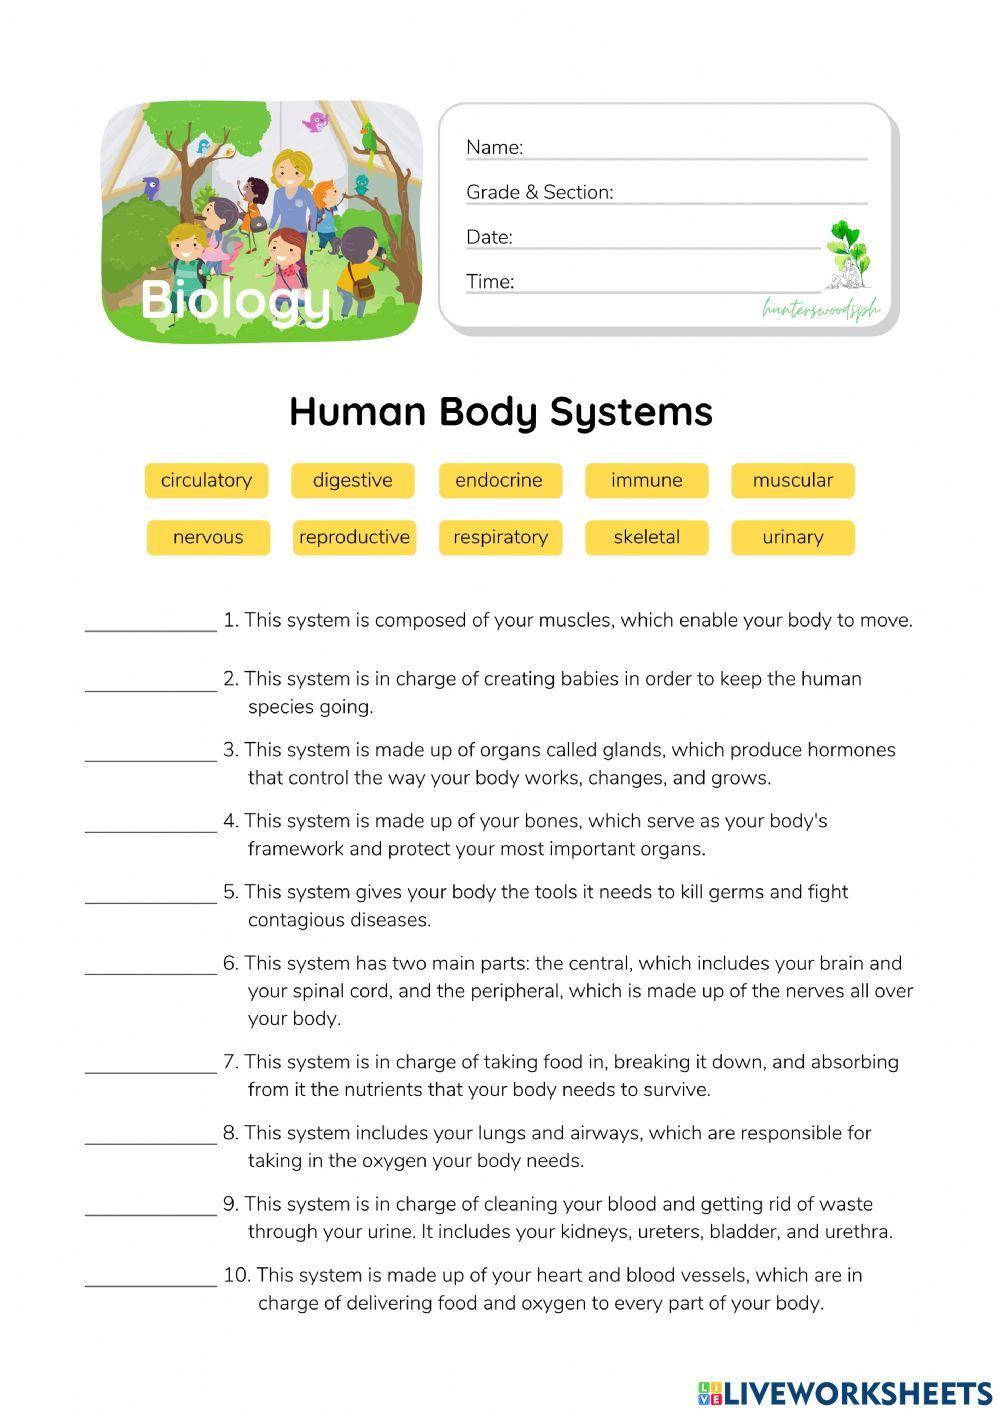 Human Body Systems - HuntersWoodsPH.com Worksheet